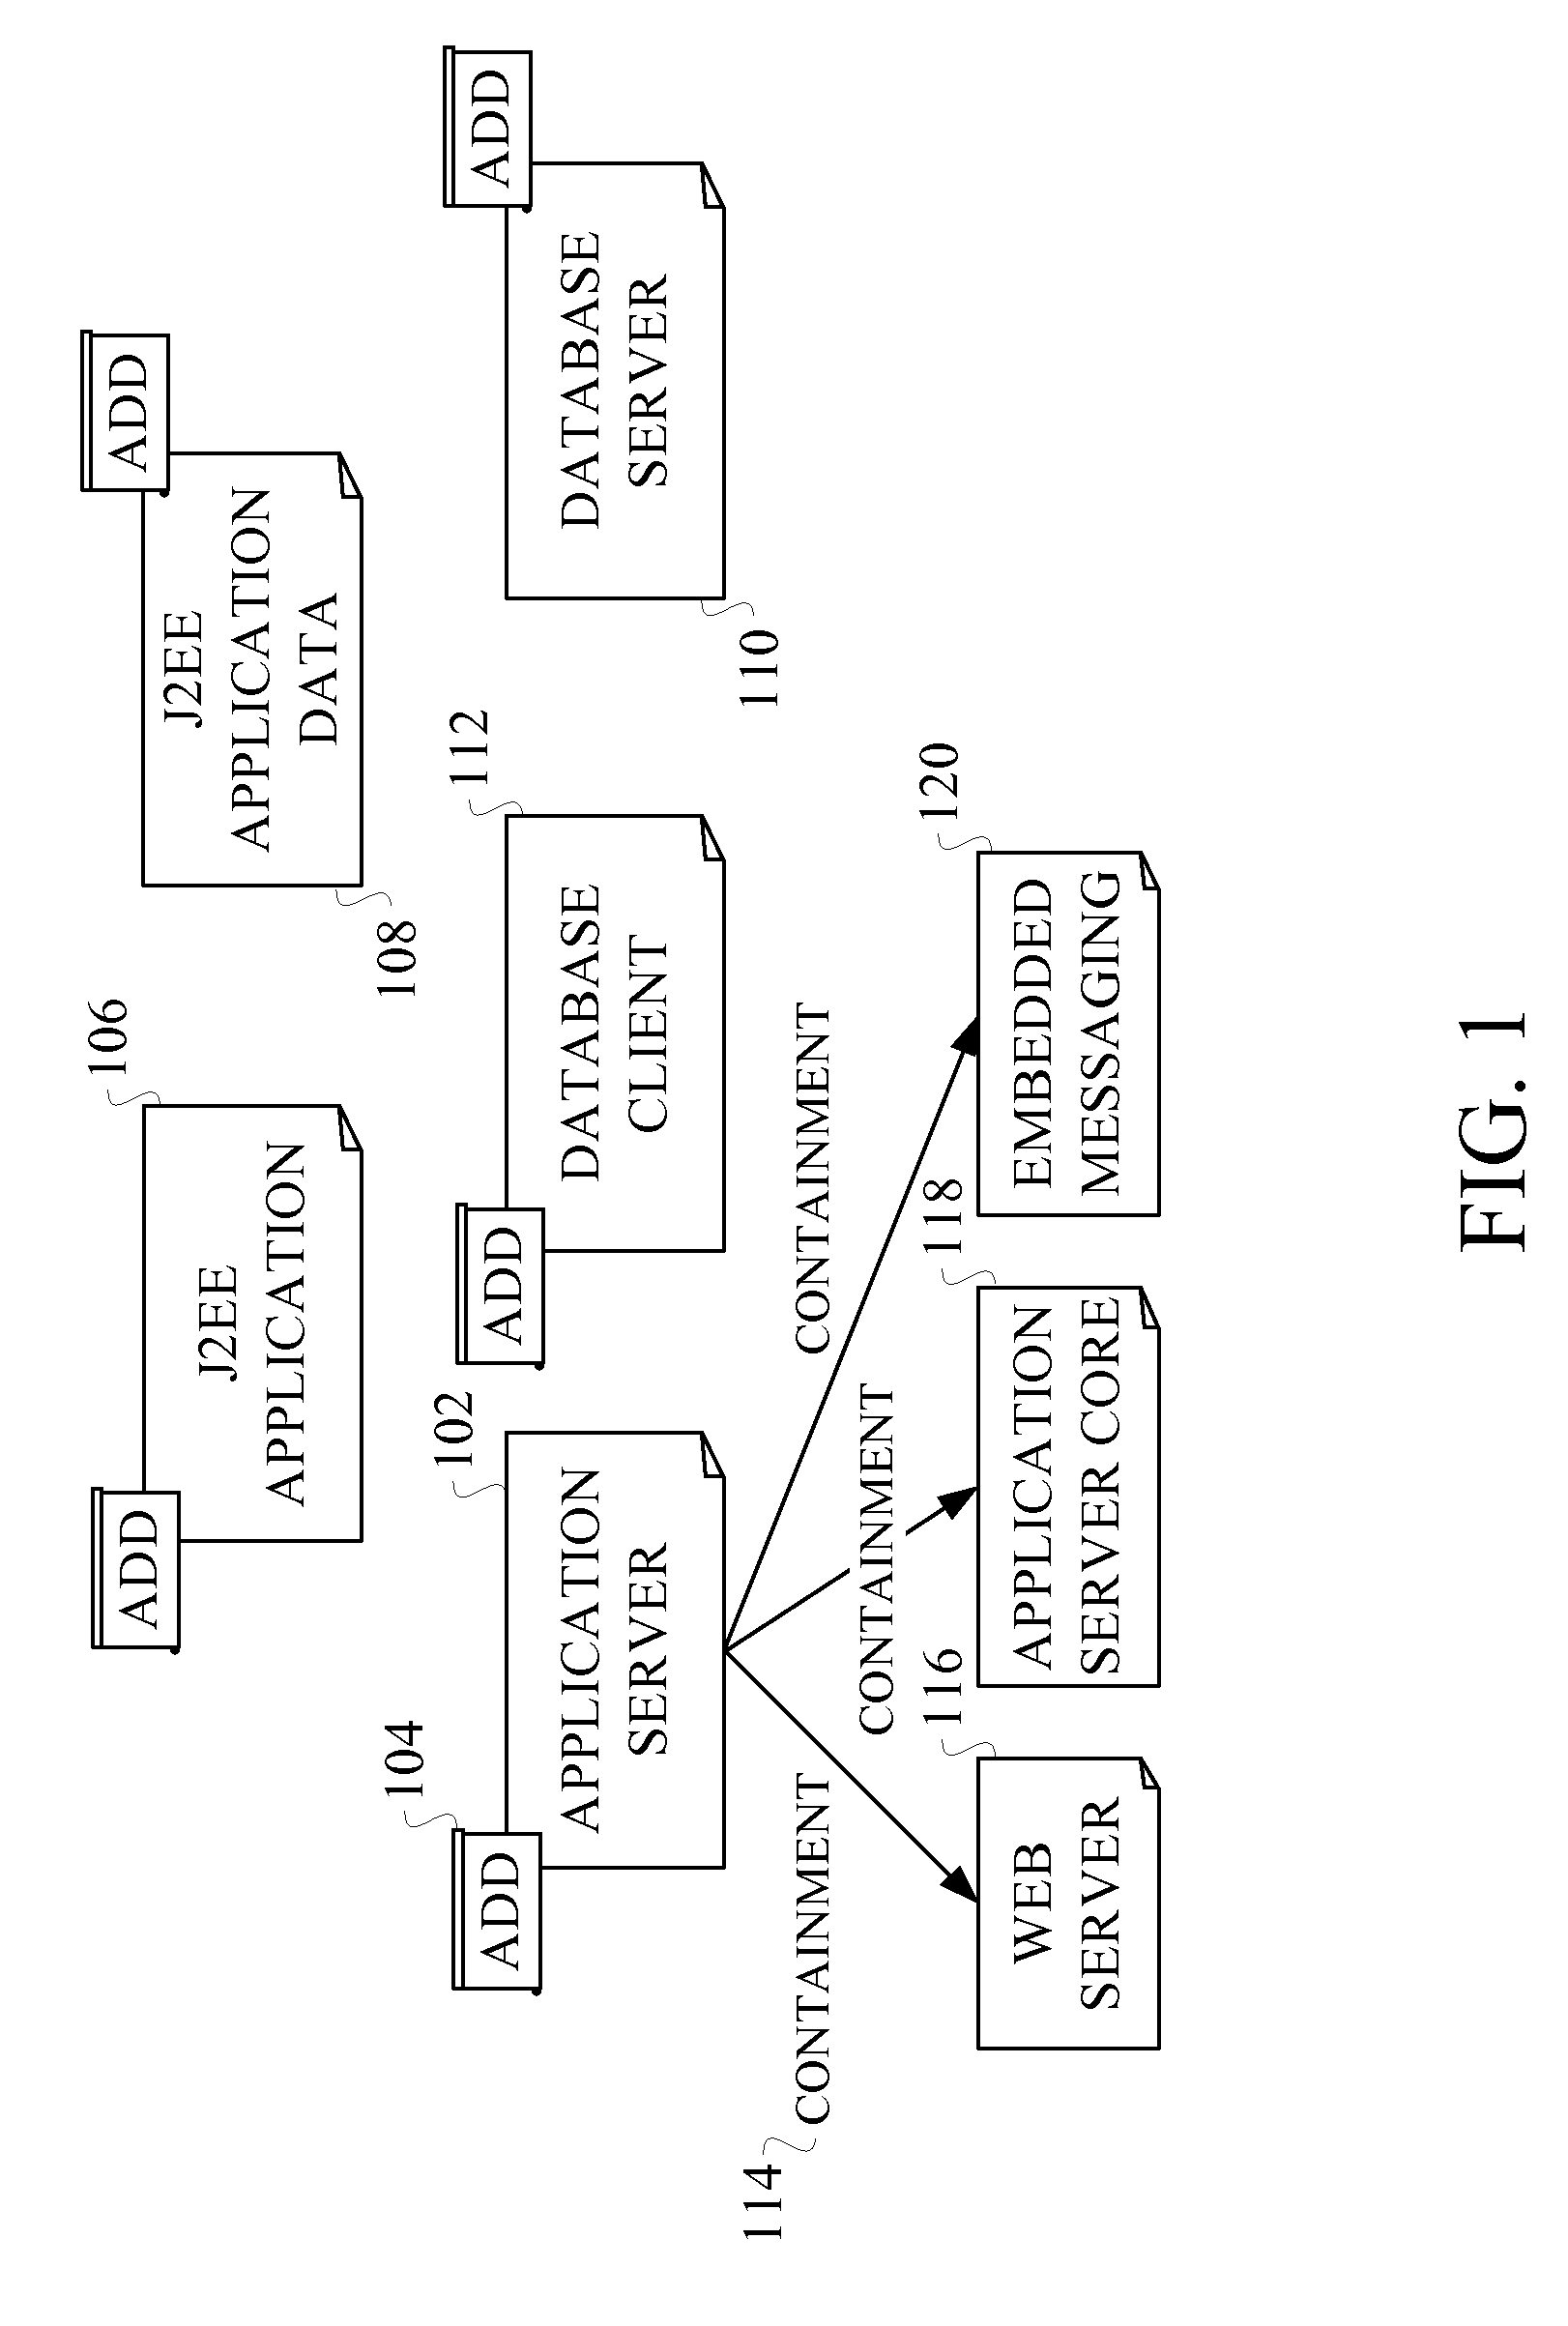 Systems and methods for constructing relationship specifications from component interactions